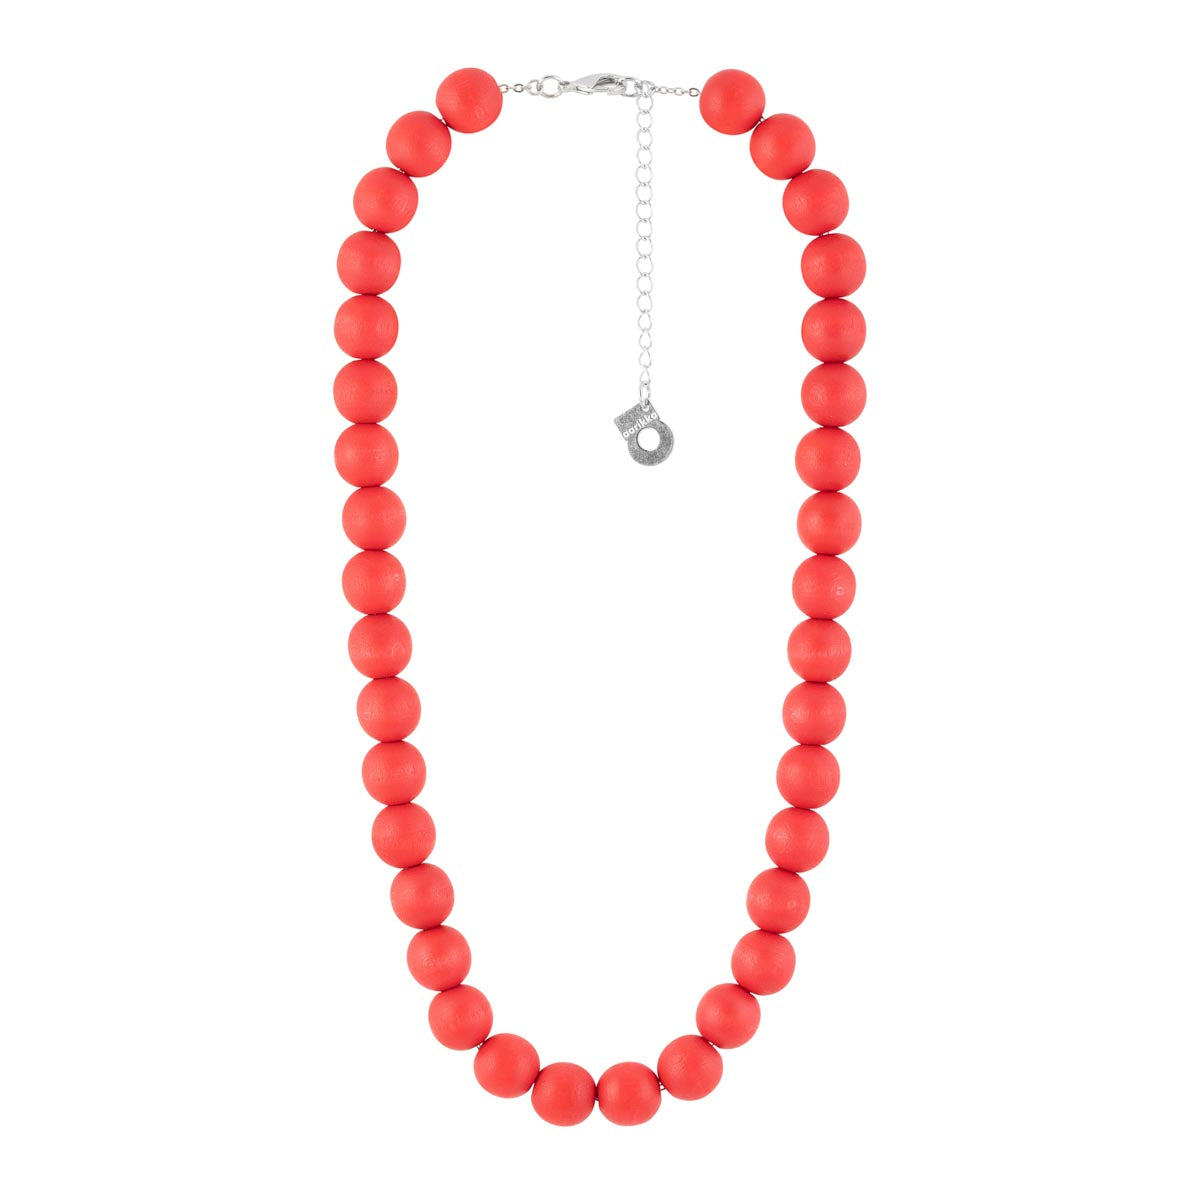 Aito necklace, red